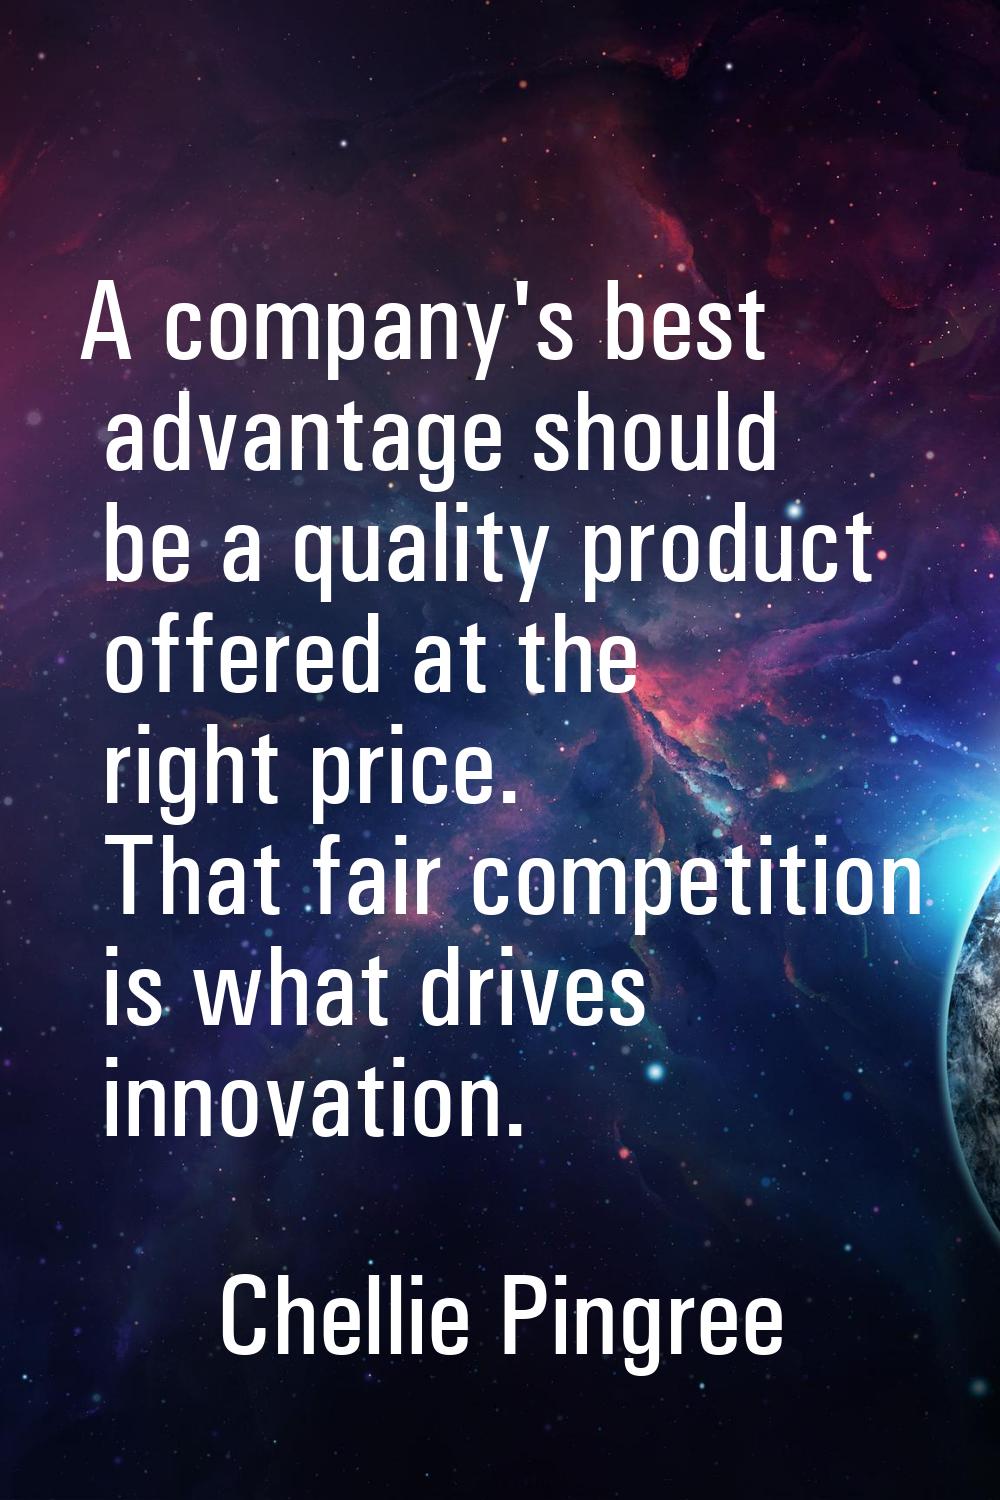 A company's best advantage should be a quality product offered at the right price. That fair compet